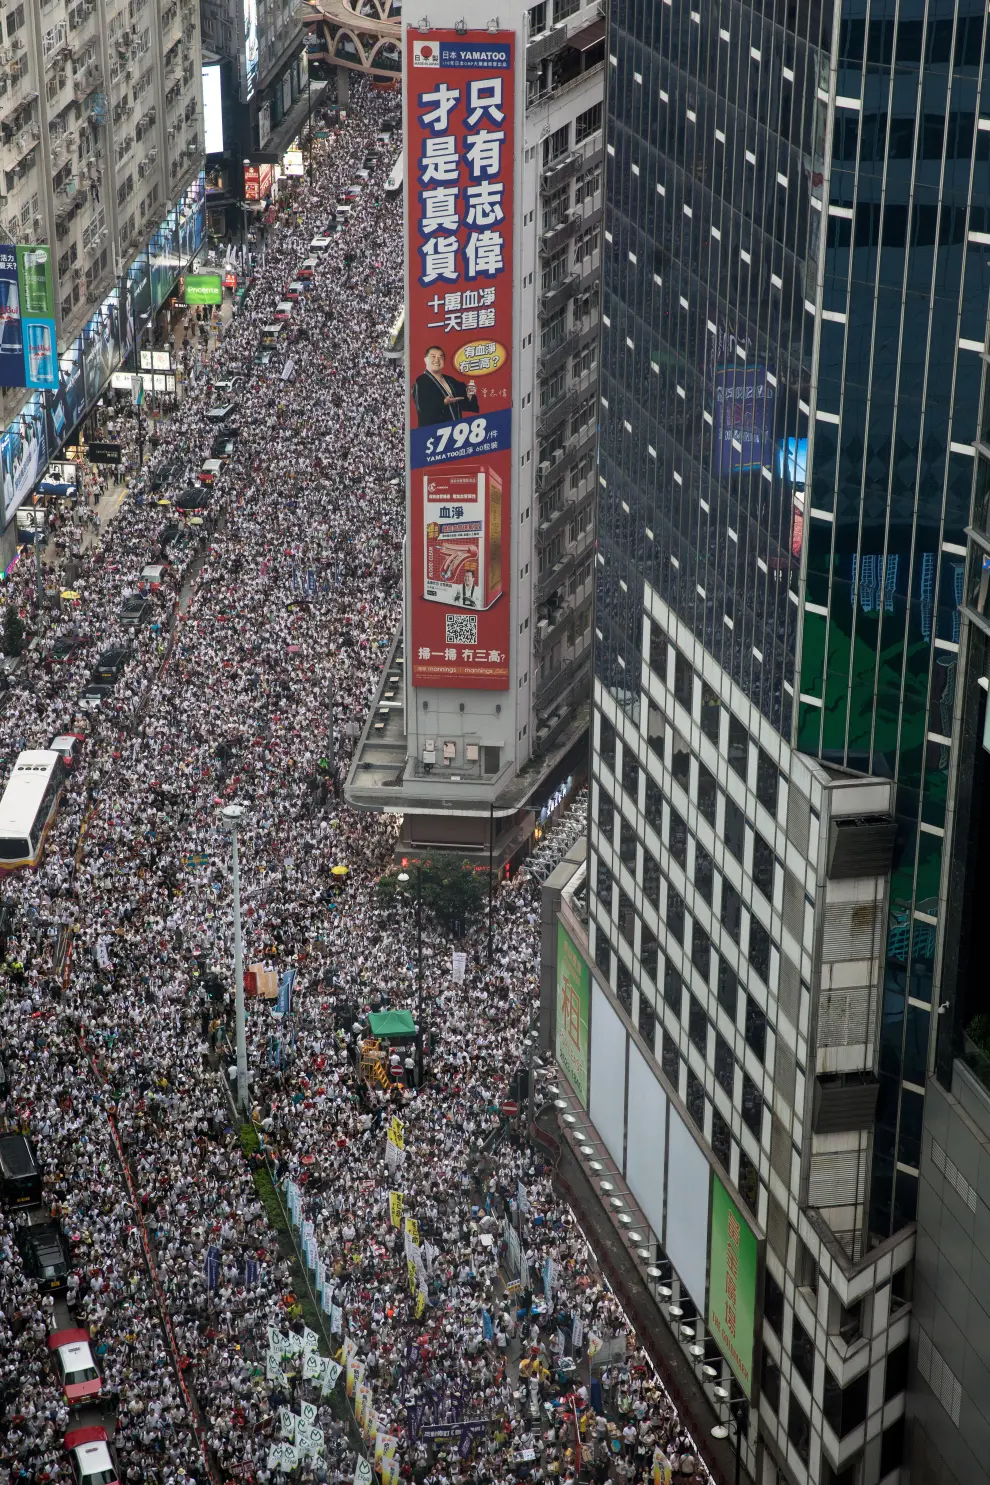 HK ANTI-EXTRADITION MARCH-02. Hong Kong (China), 09/06/2019.- Thousands of protesters take part in a march against amendments to an extradition bill in Hong Kong, China, 09 June 2019. The bill, which has faced immense opposition from pan-democrats, the business sector and the international community, would allow the transfer of fugitives to jurisdictions which Hong Kong does not have a treaty with, including mainland China. Critics of the bill have expressed concern over unfair trials and a lack of human rights protection in mainland China. (Protestas, Estados Unidos) EFE/EPA/JEROME FAVRE March against proposed extradition bill to China